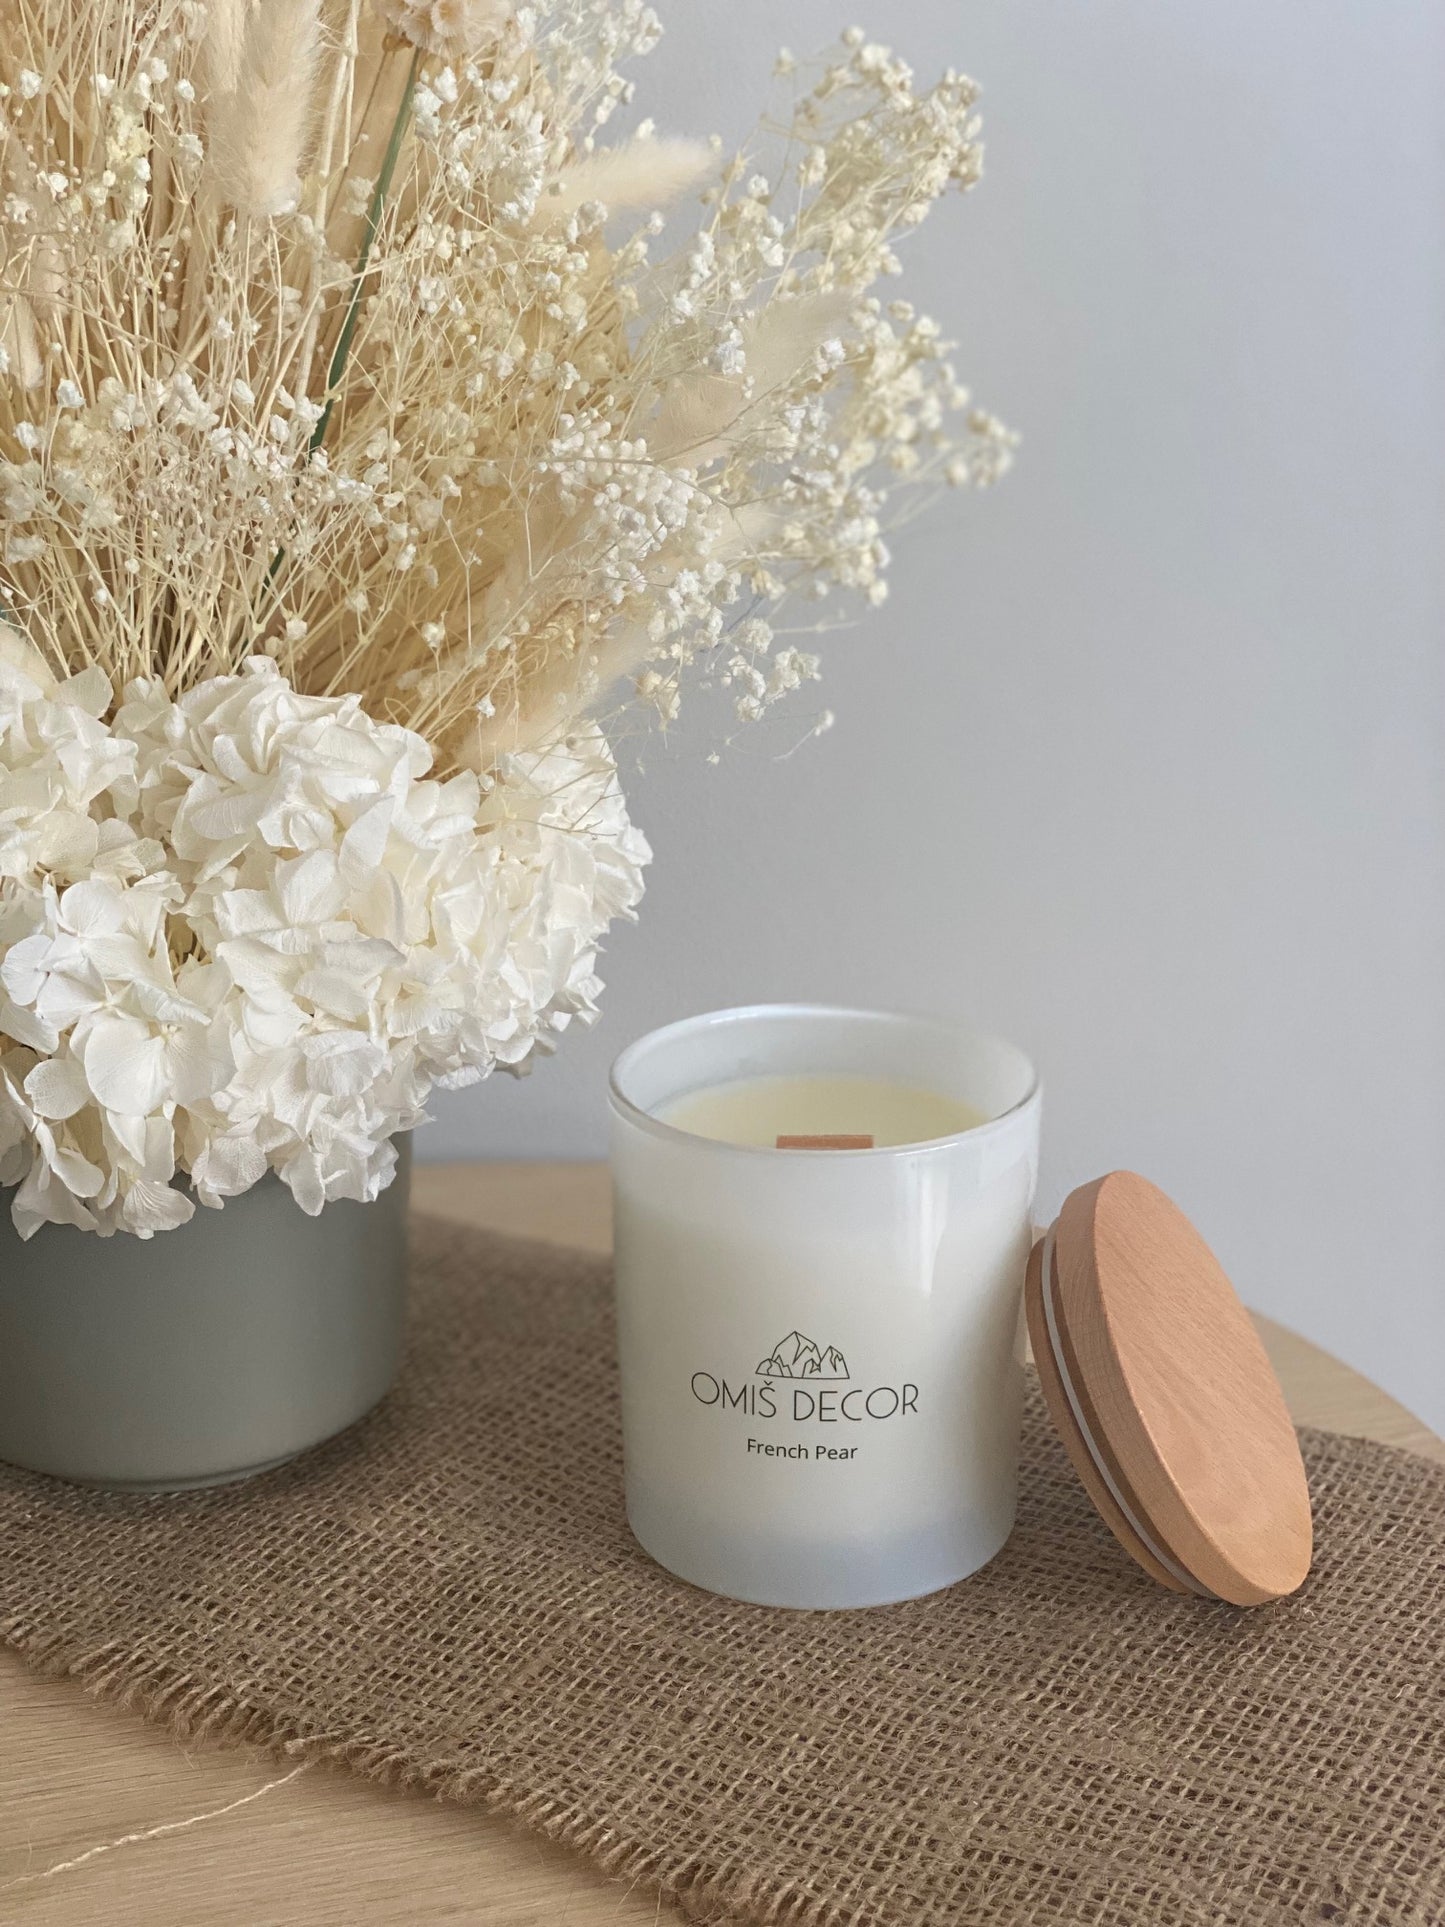 Enhance your living space with the scent that you love. Our candles are handcrafted in Sydney, using 100% natural soy wax - perfect for every room & occasion.